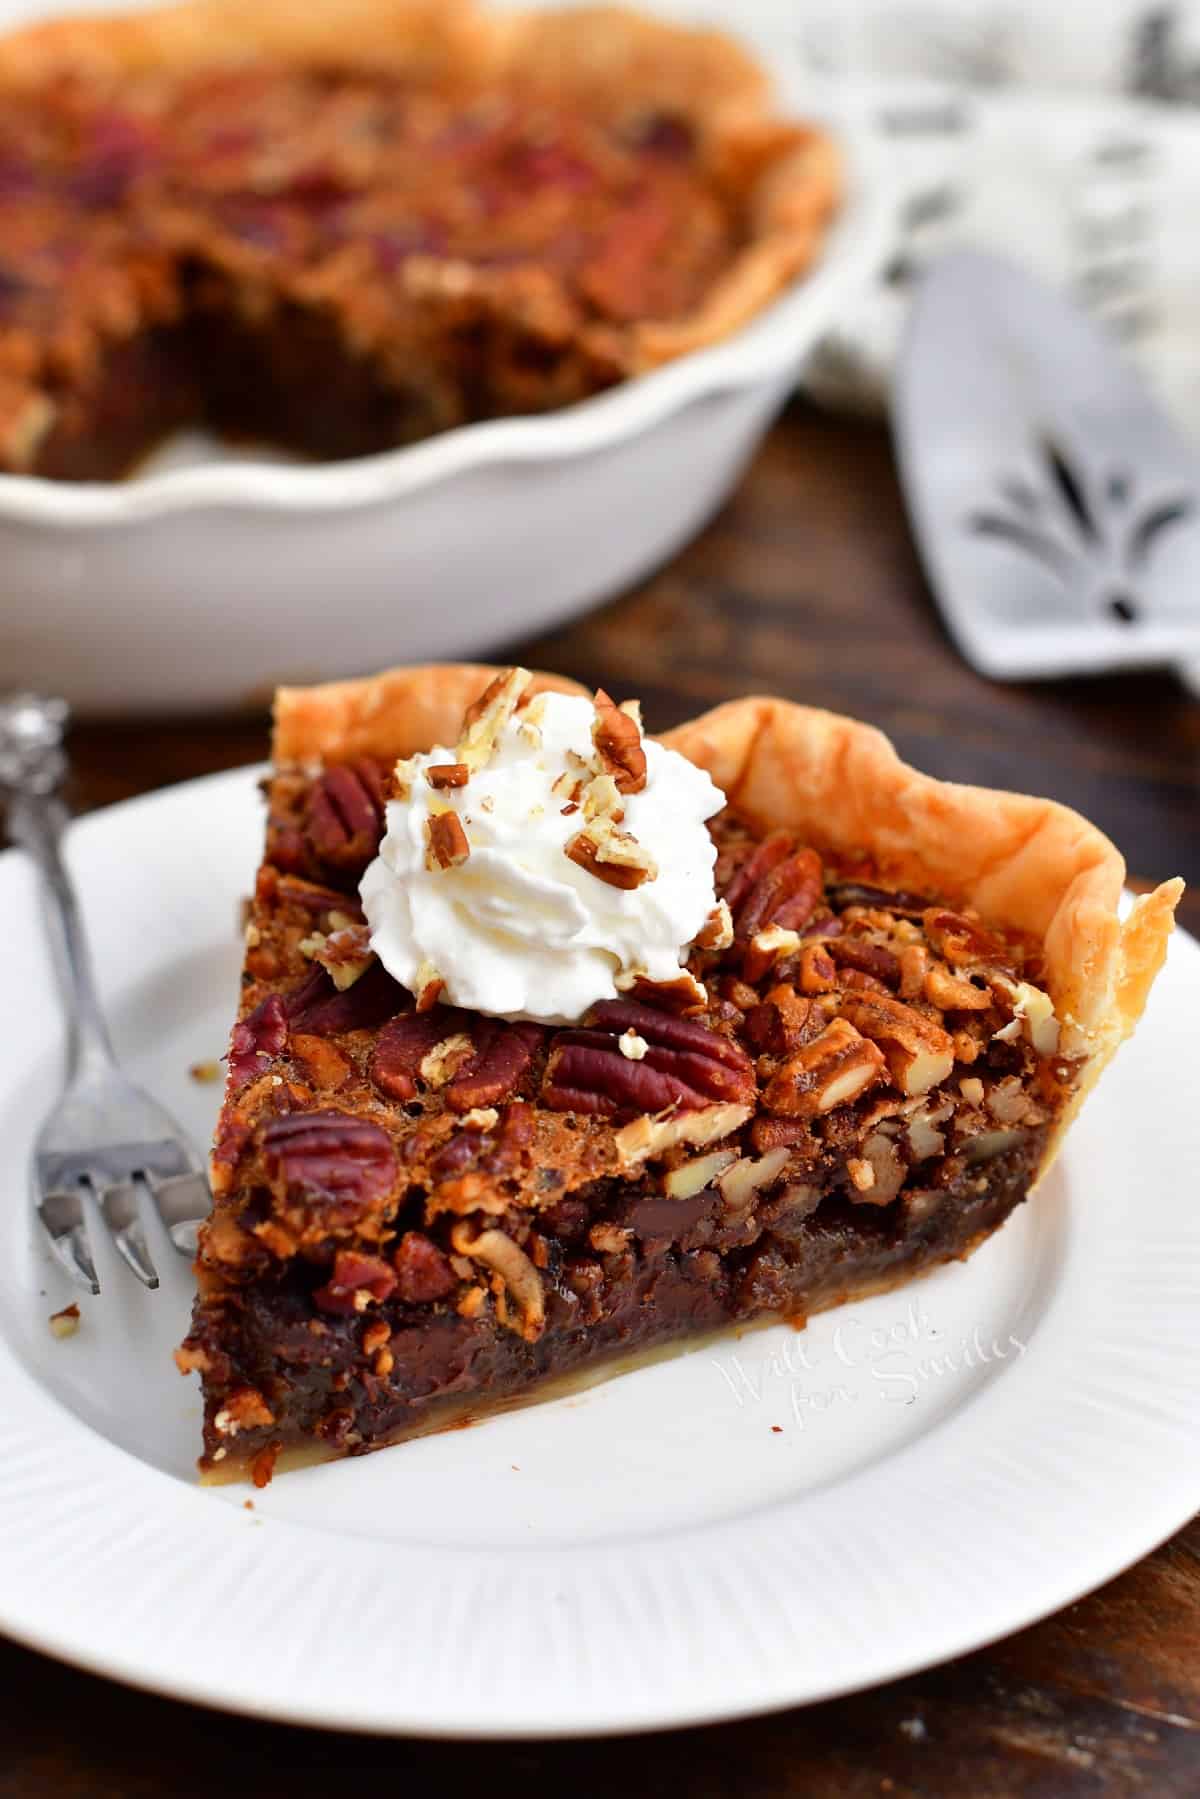 Chocolate Pecan Pie - Easy Classic Holiday Pie With Chocolate Flavors